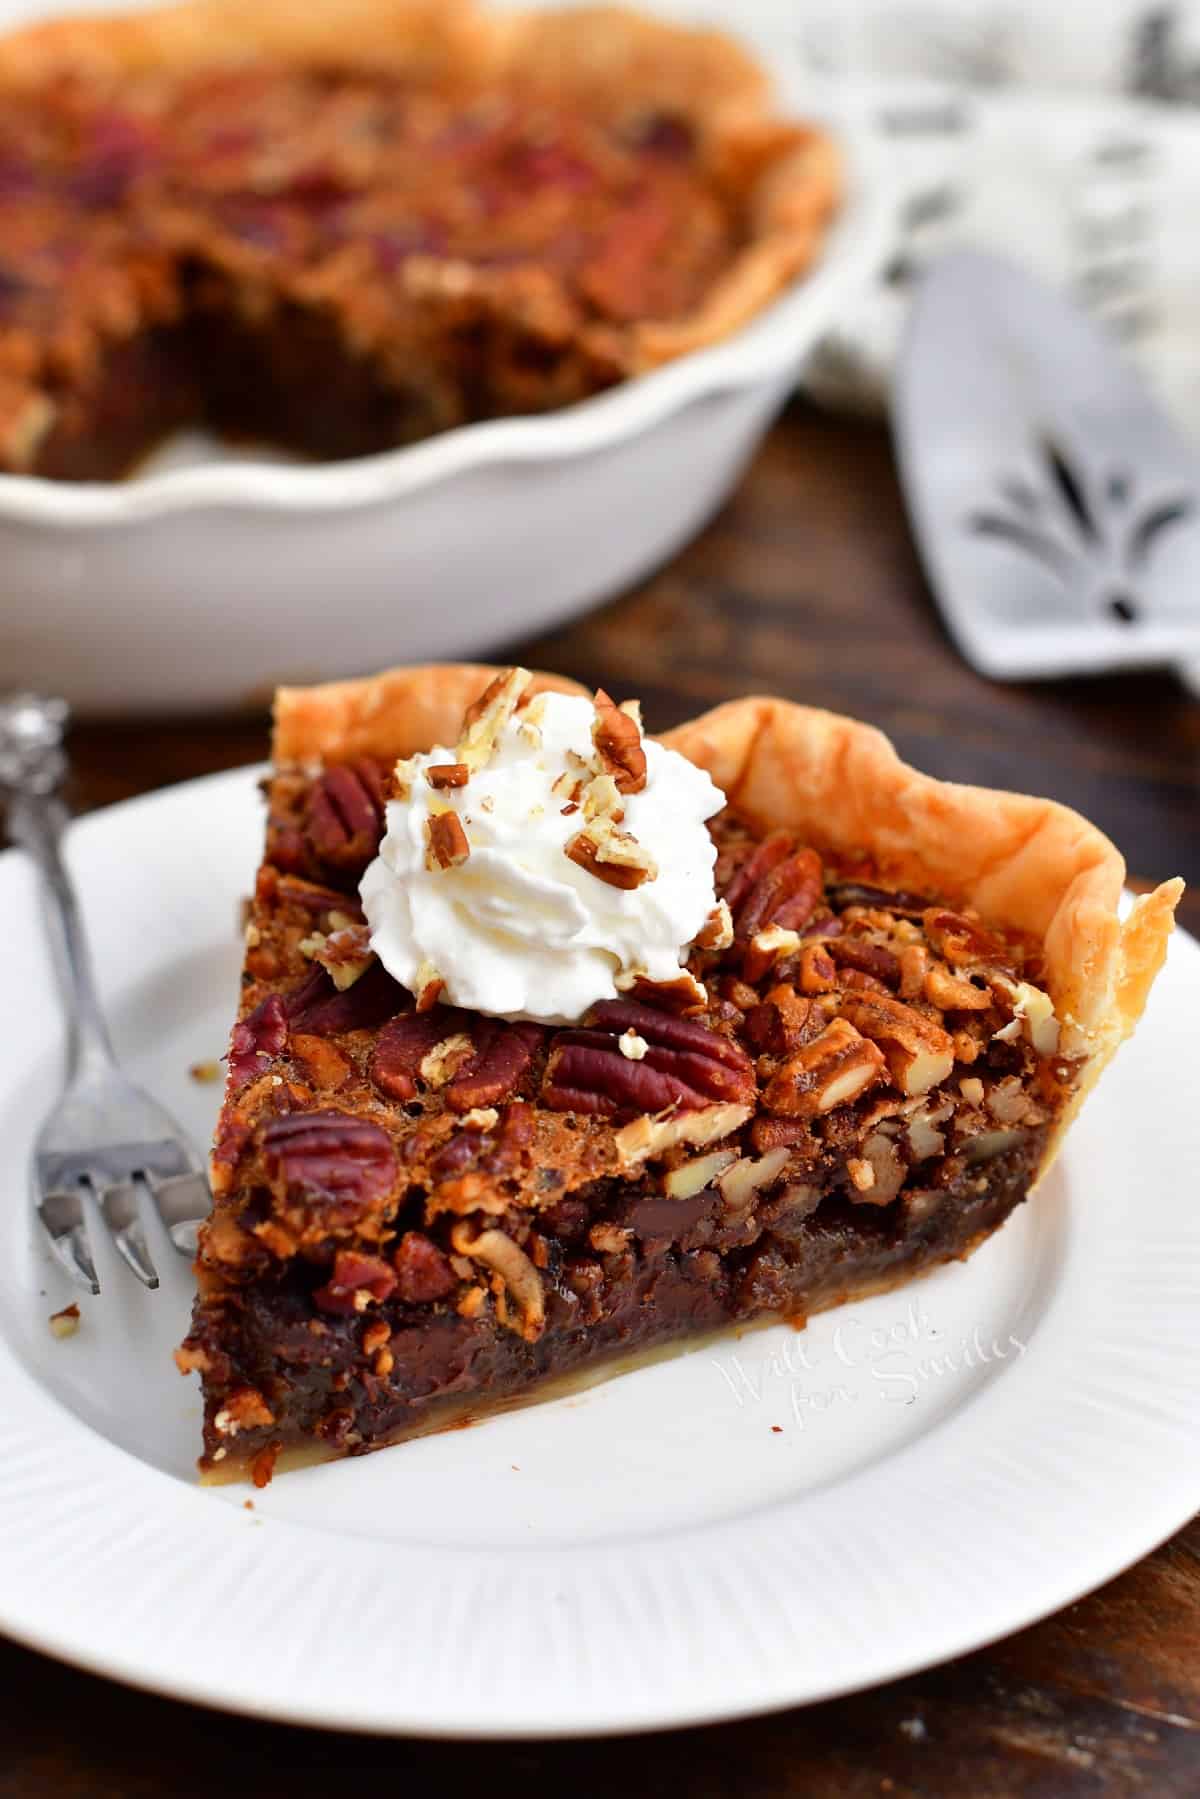 Chocolate Pecan Pie - Easy Classic Holiday Pie With Chocolate Flavors